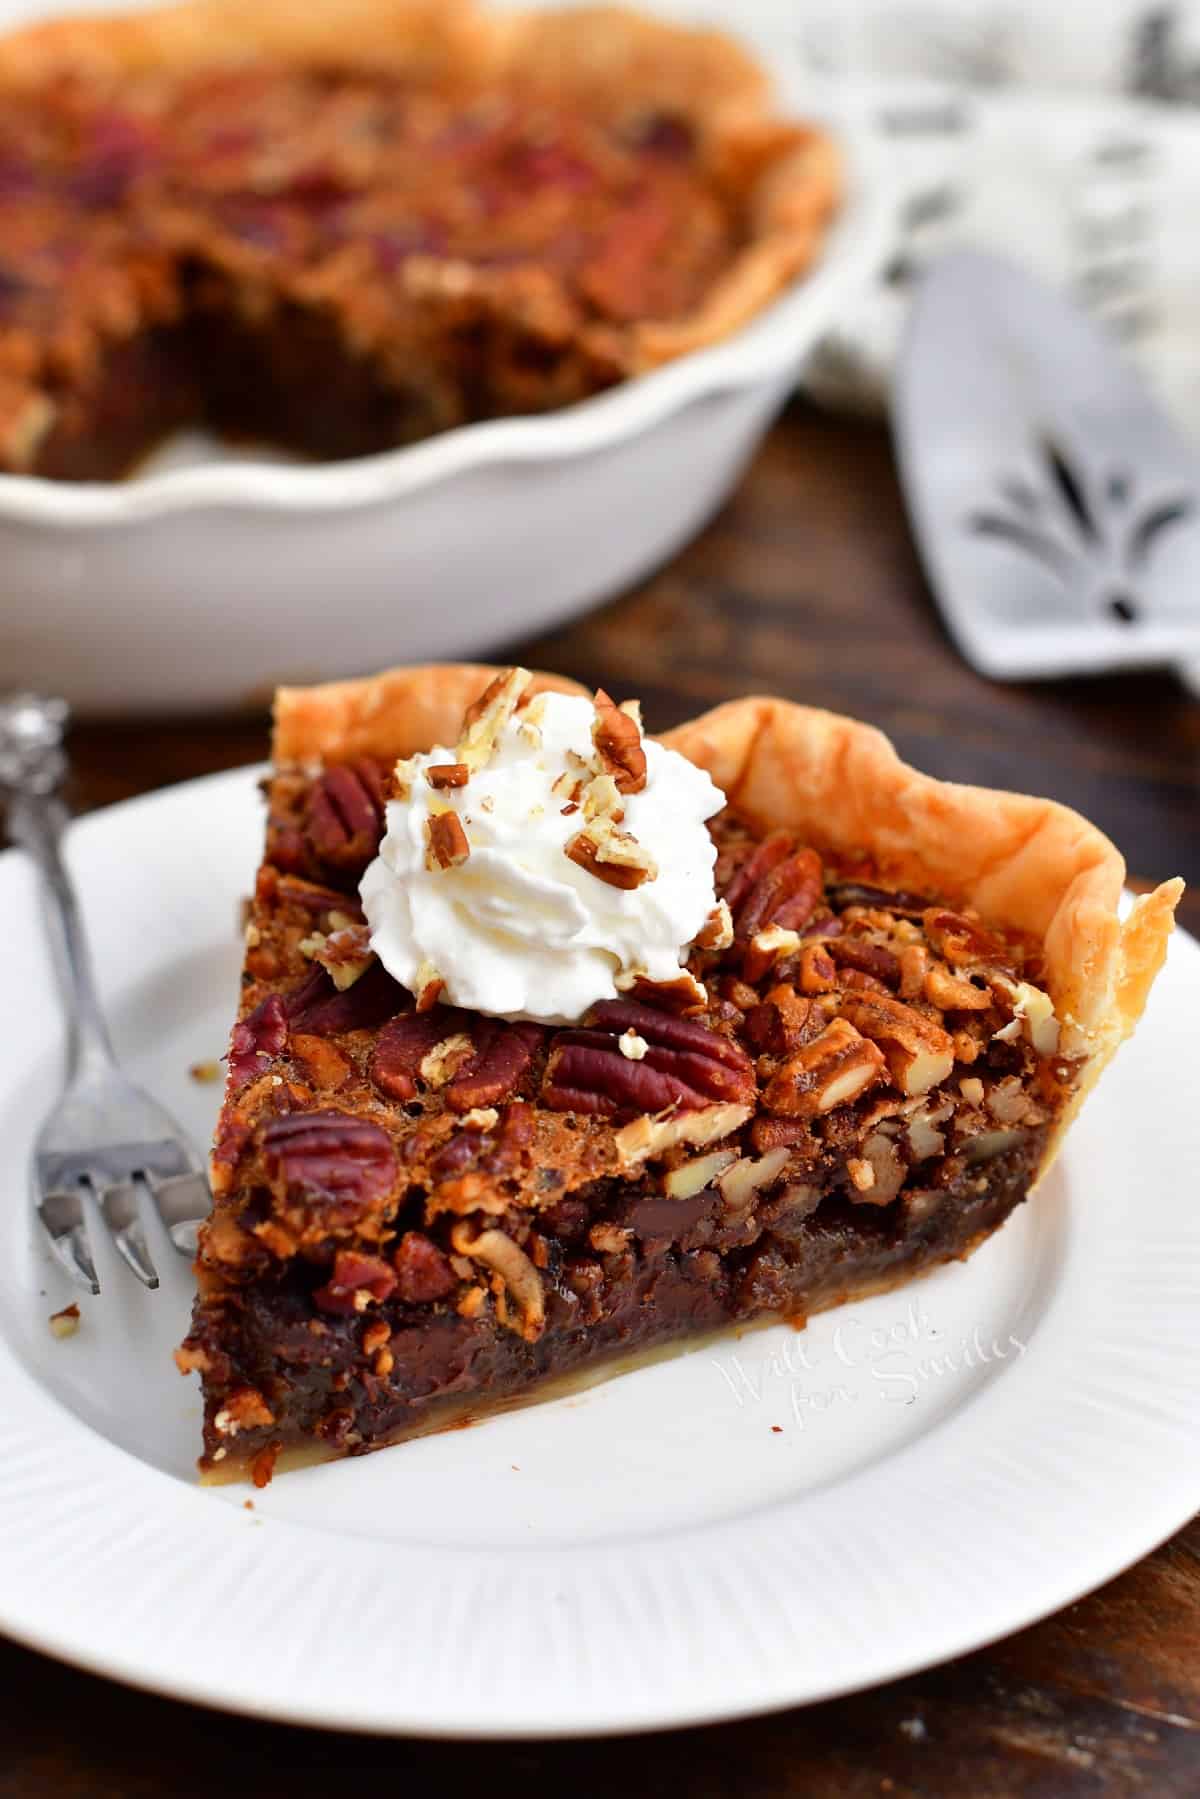 Chocolate Pecan Pie - Easy Classic Holiday Pie With Chocolate Flavors